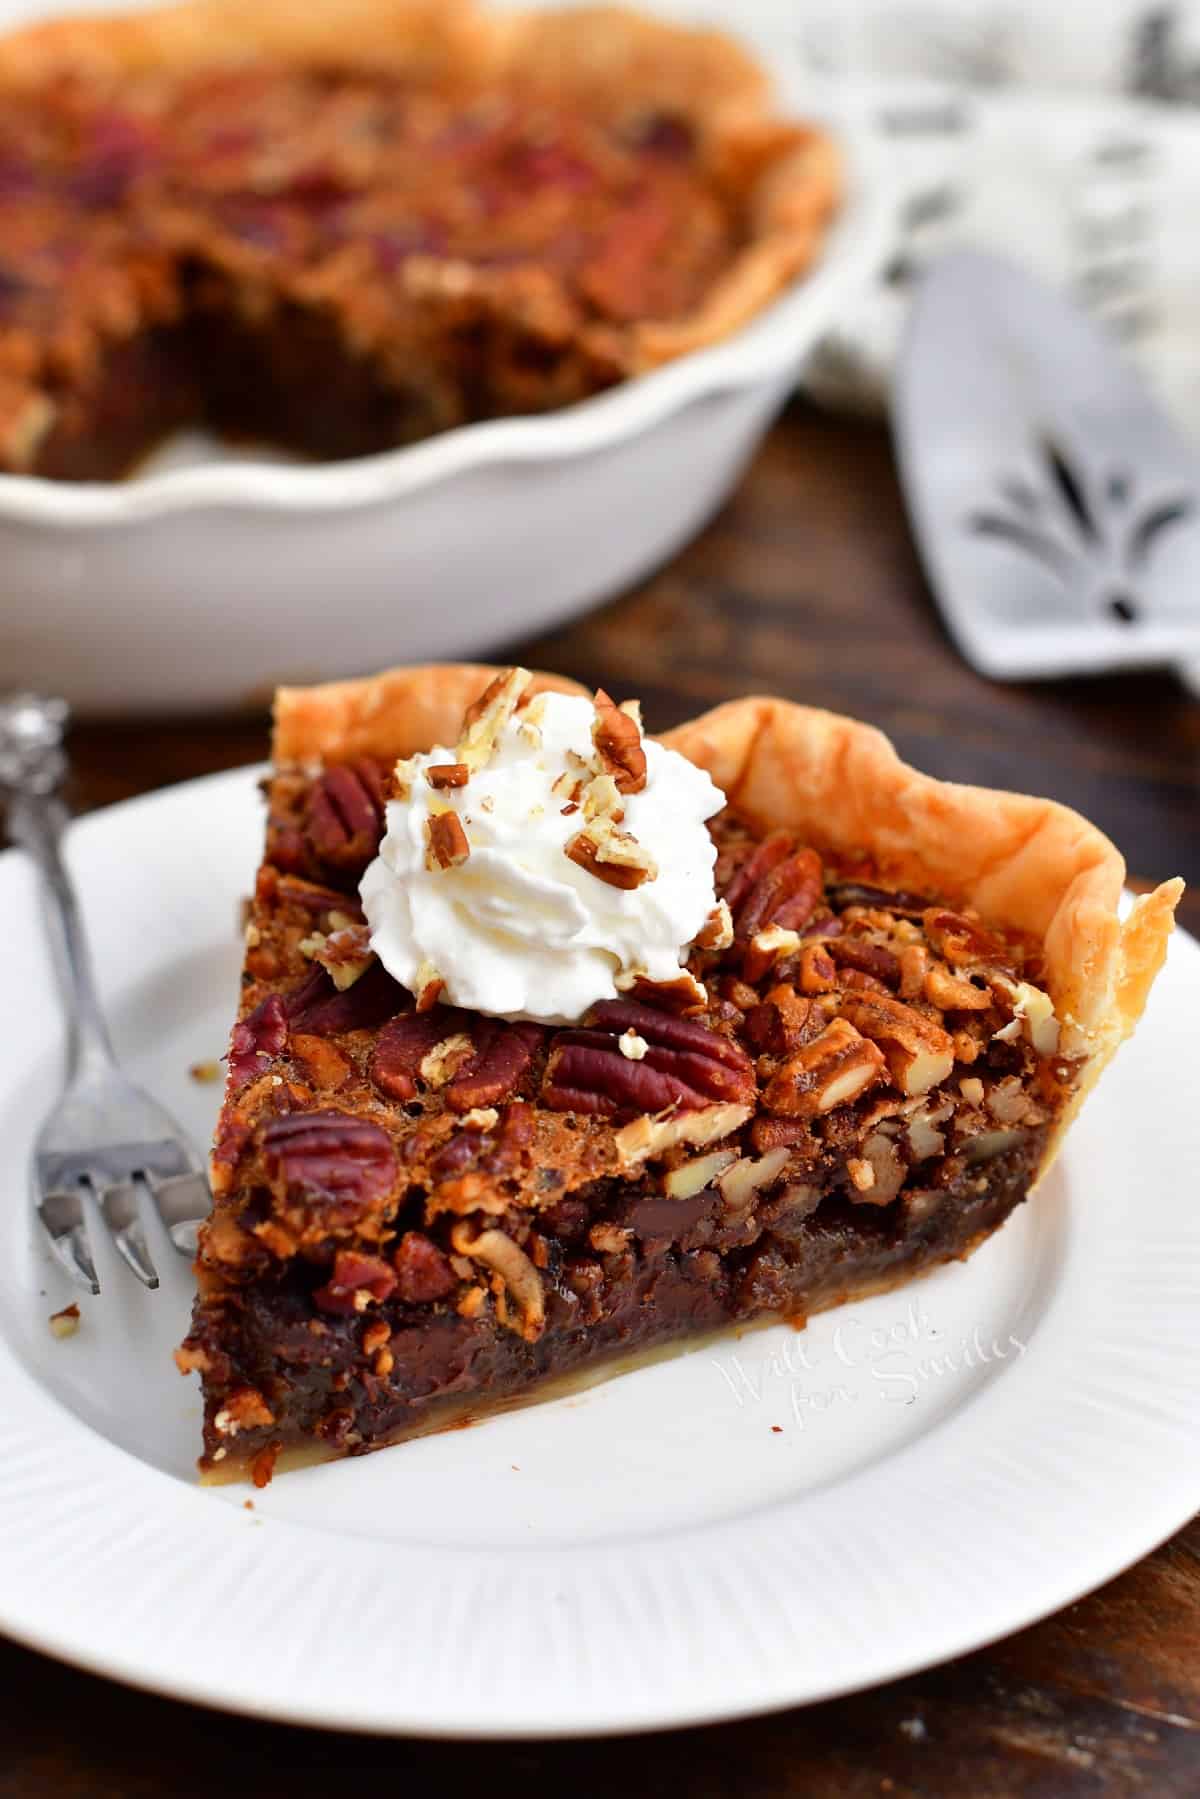 Chocolate Pecan Pie - Easy Classic Holiday Pie With Chocolate Flavors